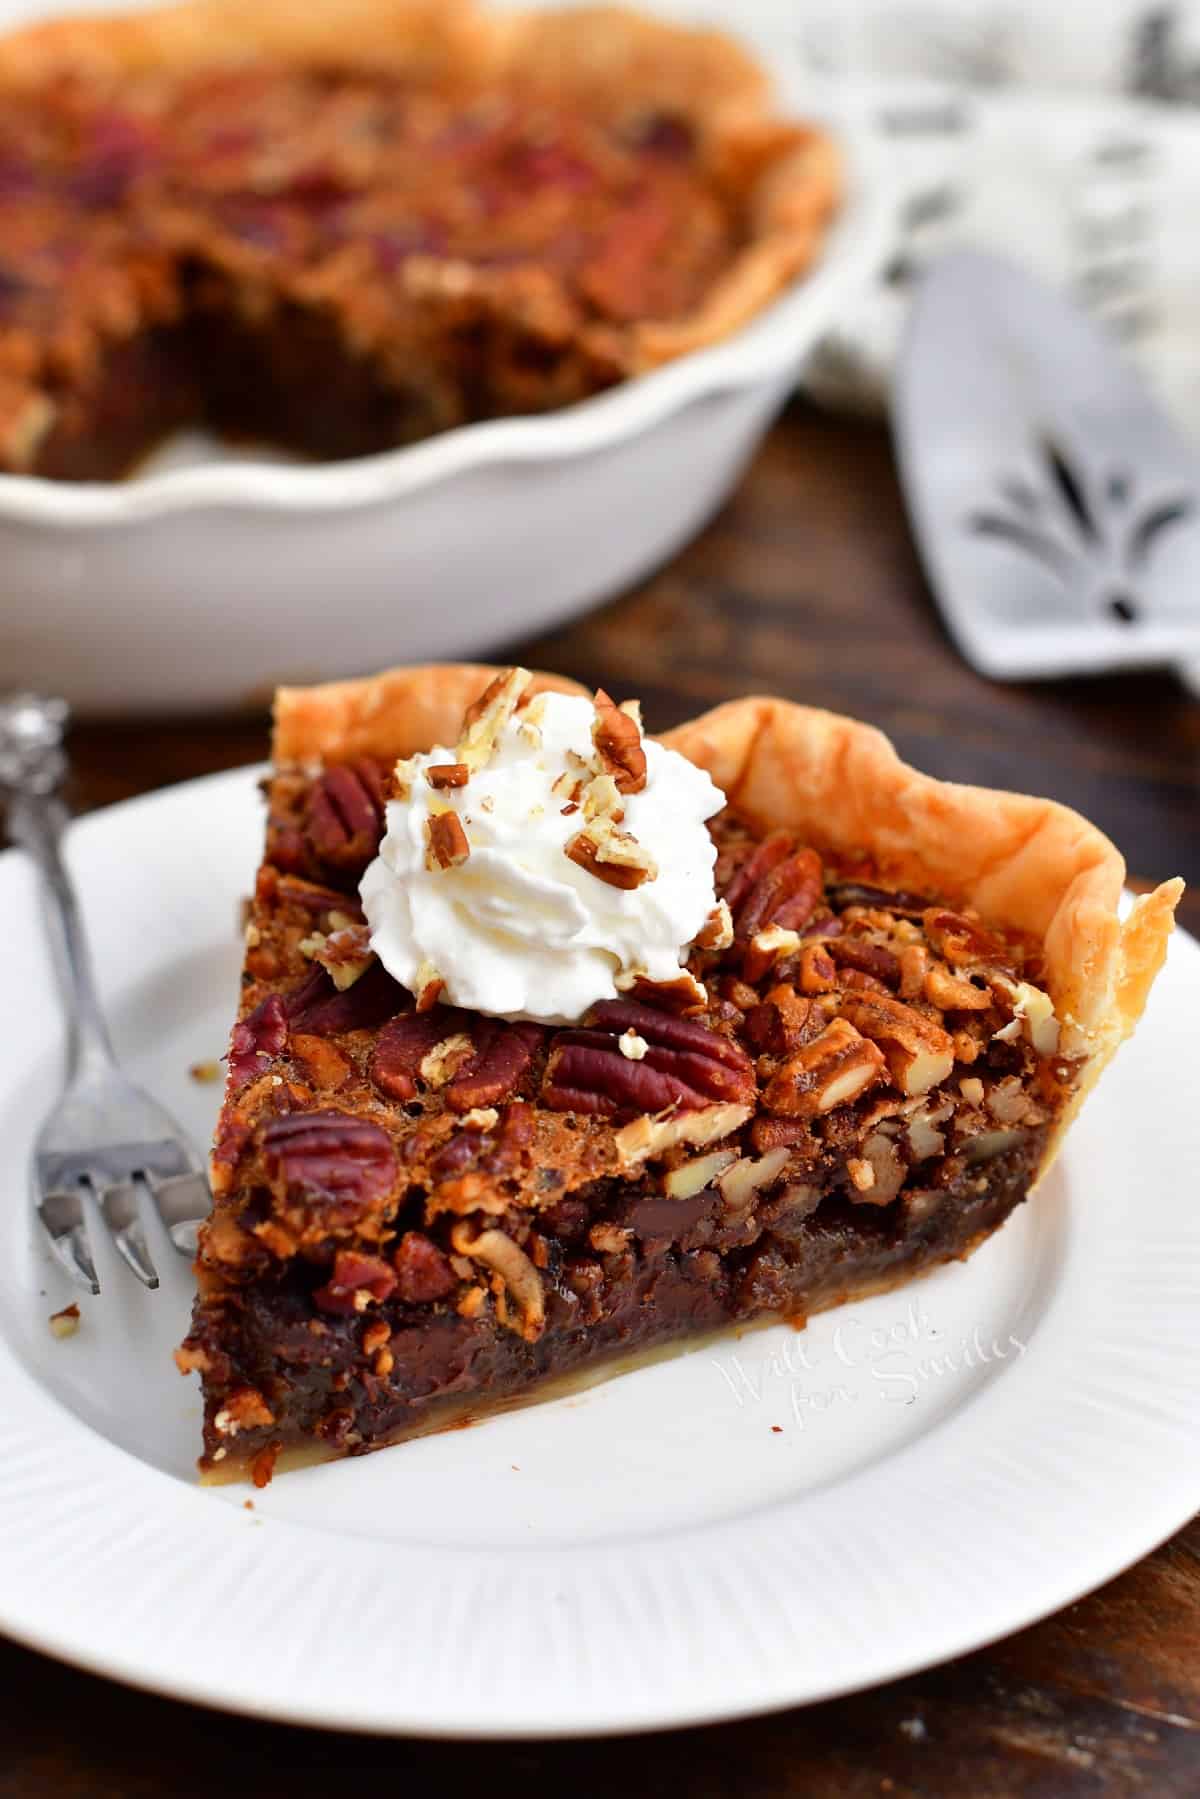 Chocolate Pecan Pie - Easy Classic Holiday Pie With Chocolate Flavors